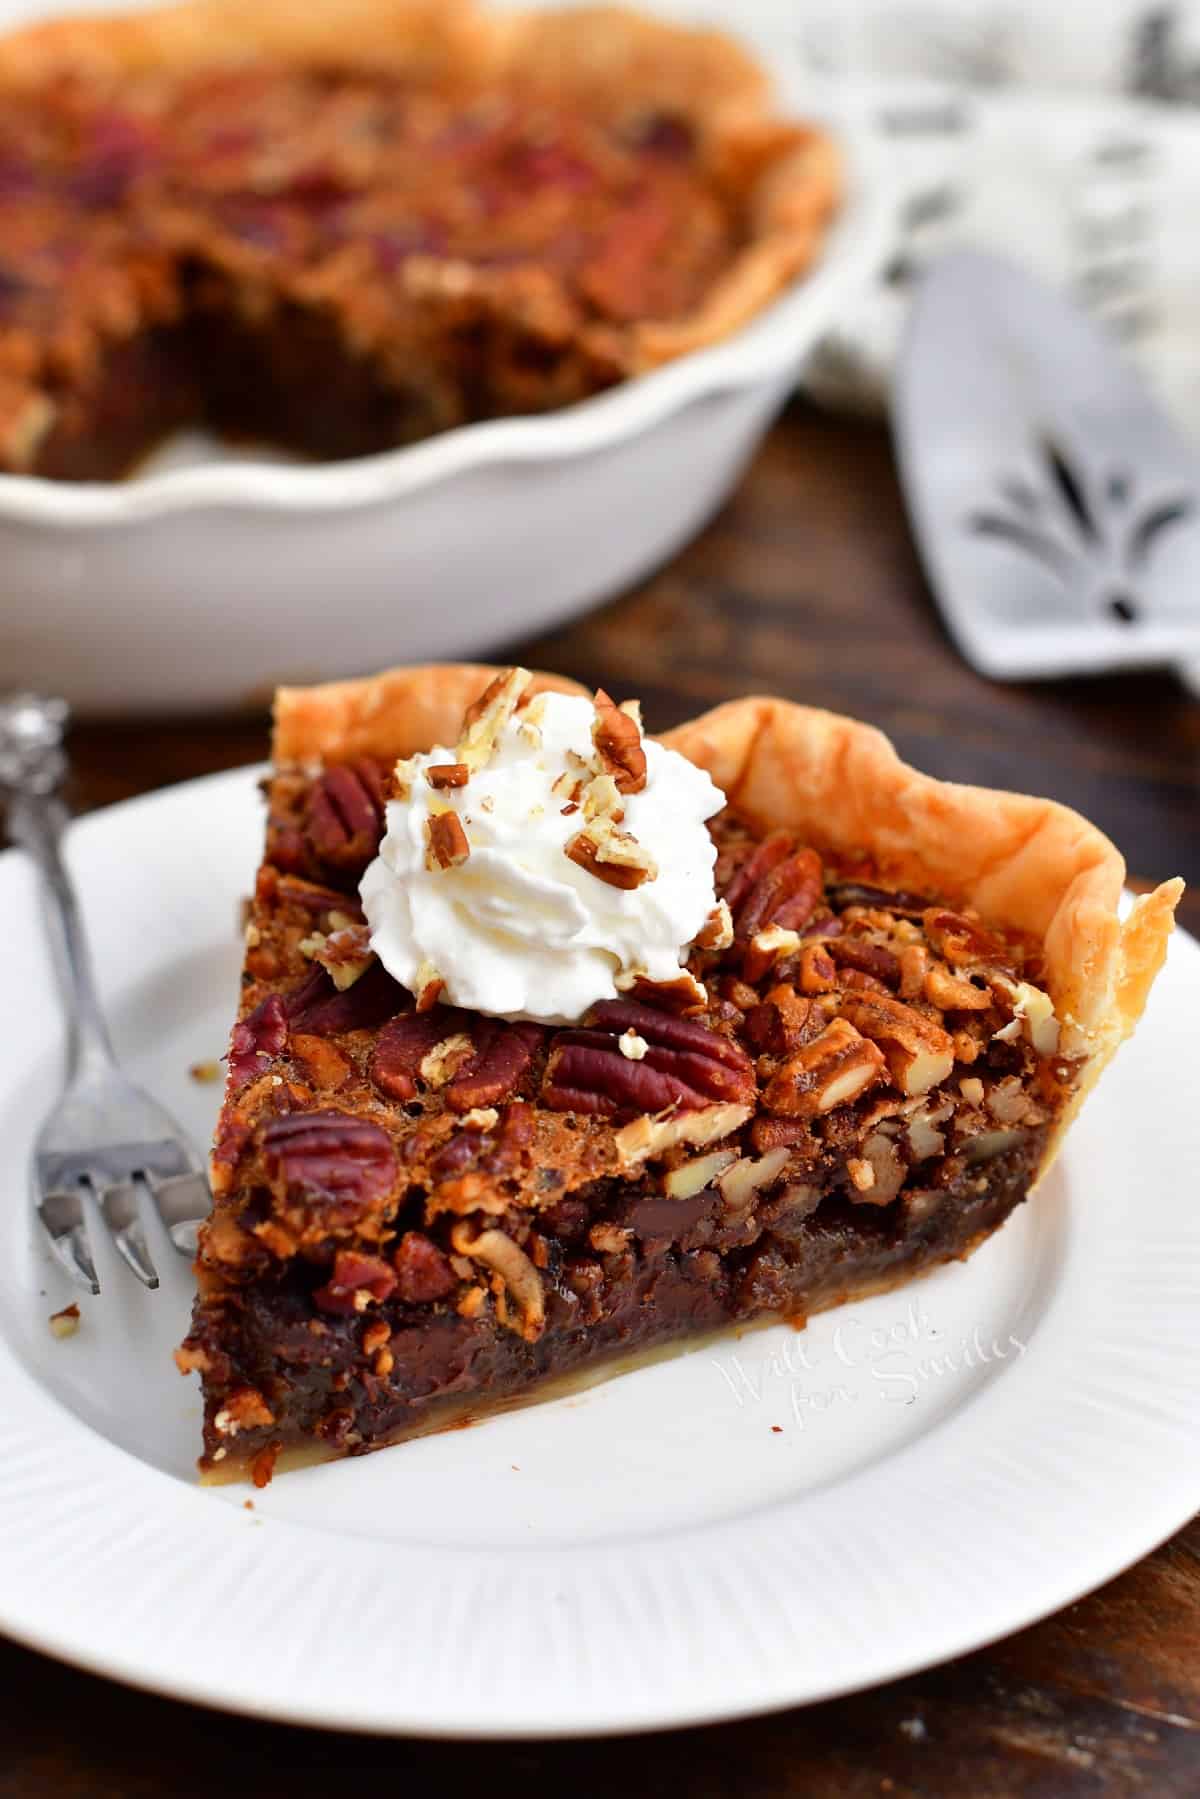 Chocolate Pecan Pie - Easy Classic Holiday Pie With Chocolate Flavors